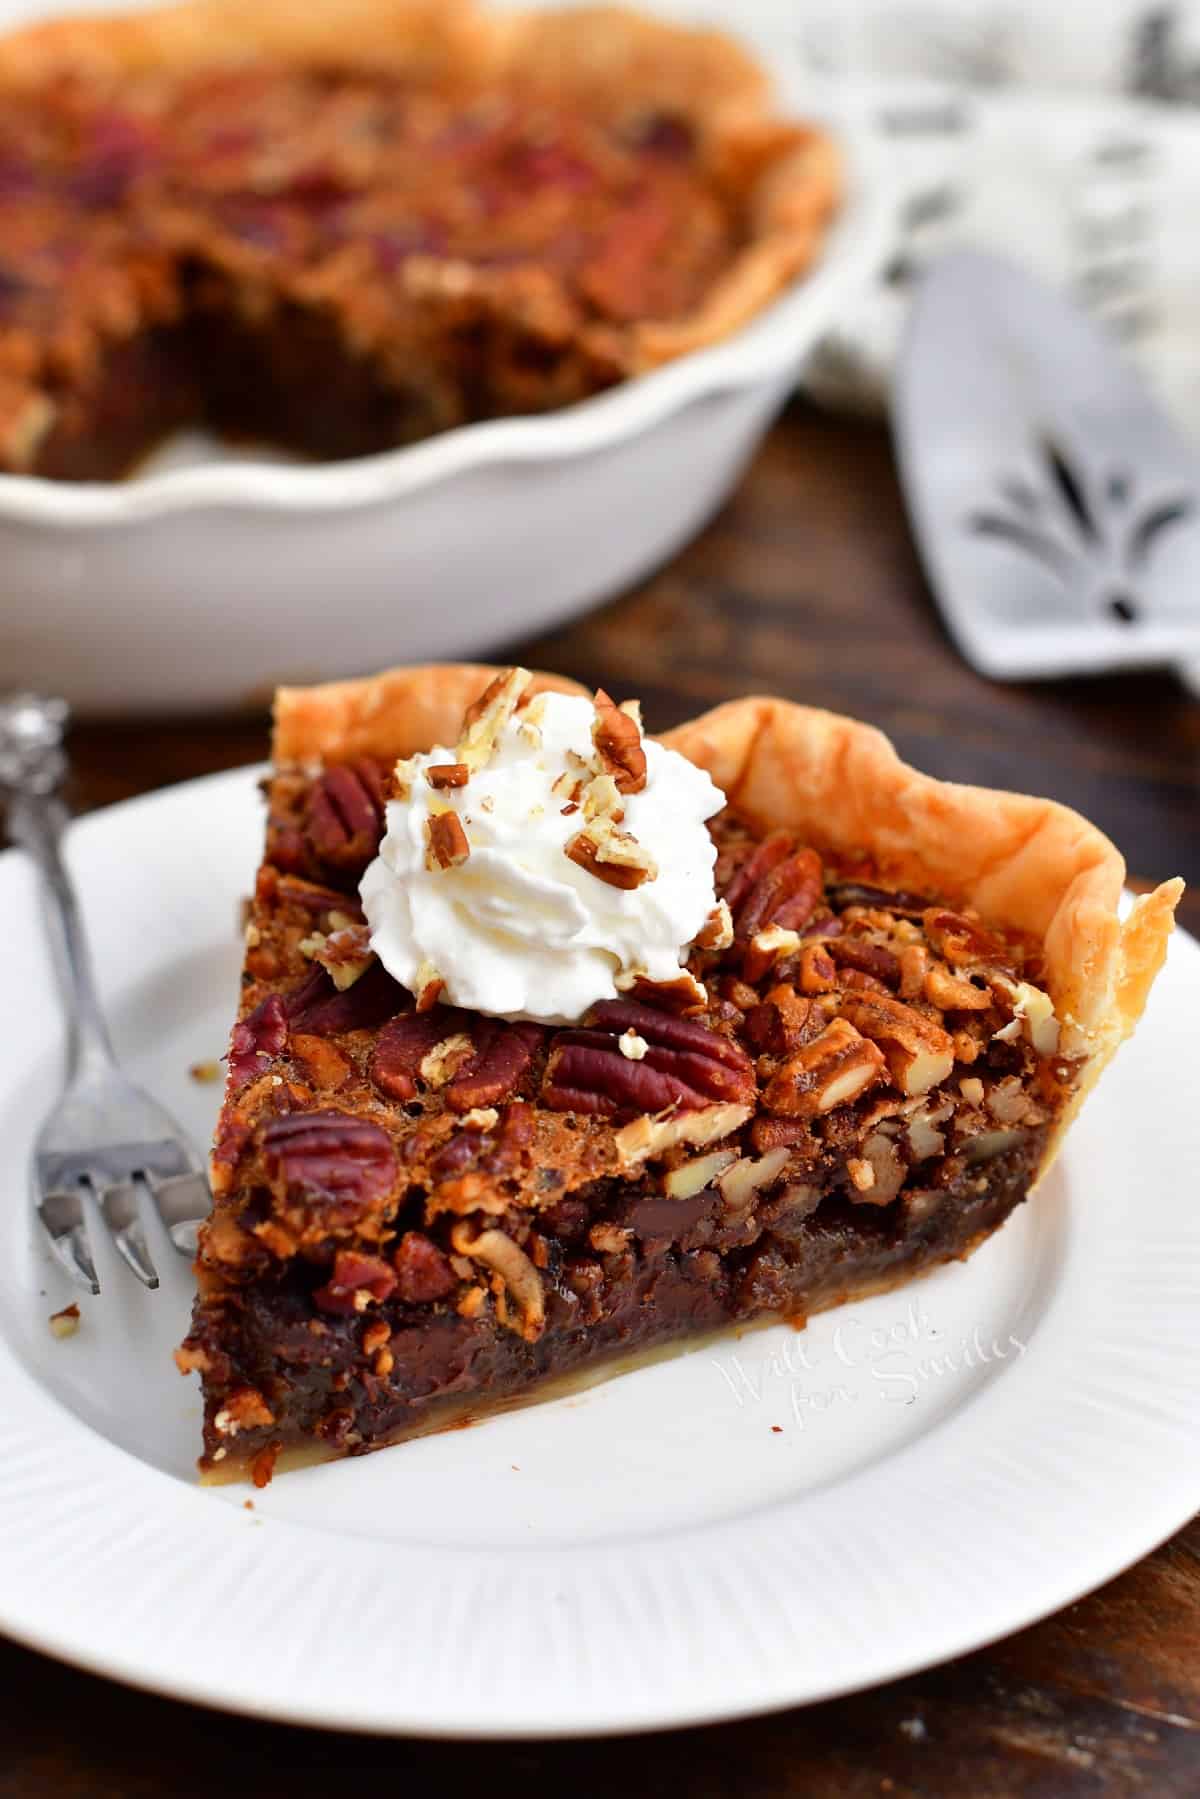 Chocolate Pecan Pie - Easy Classic Holiday Pie With Chocolate Flavors